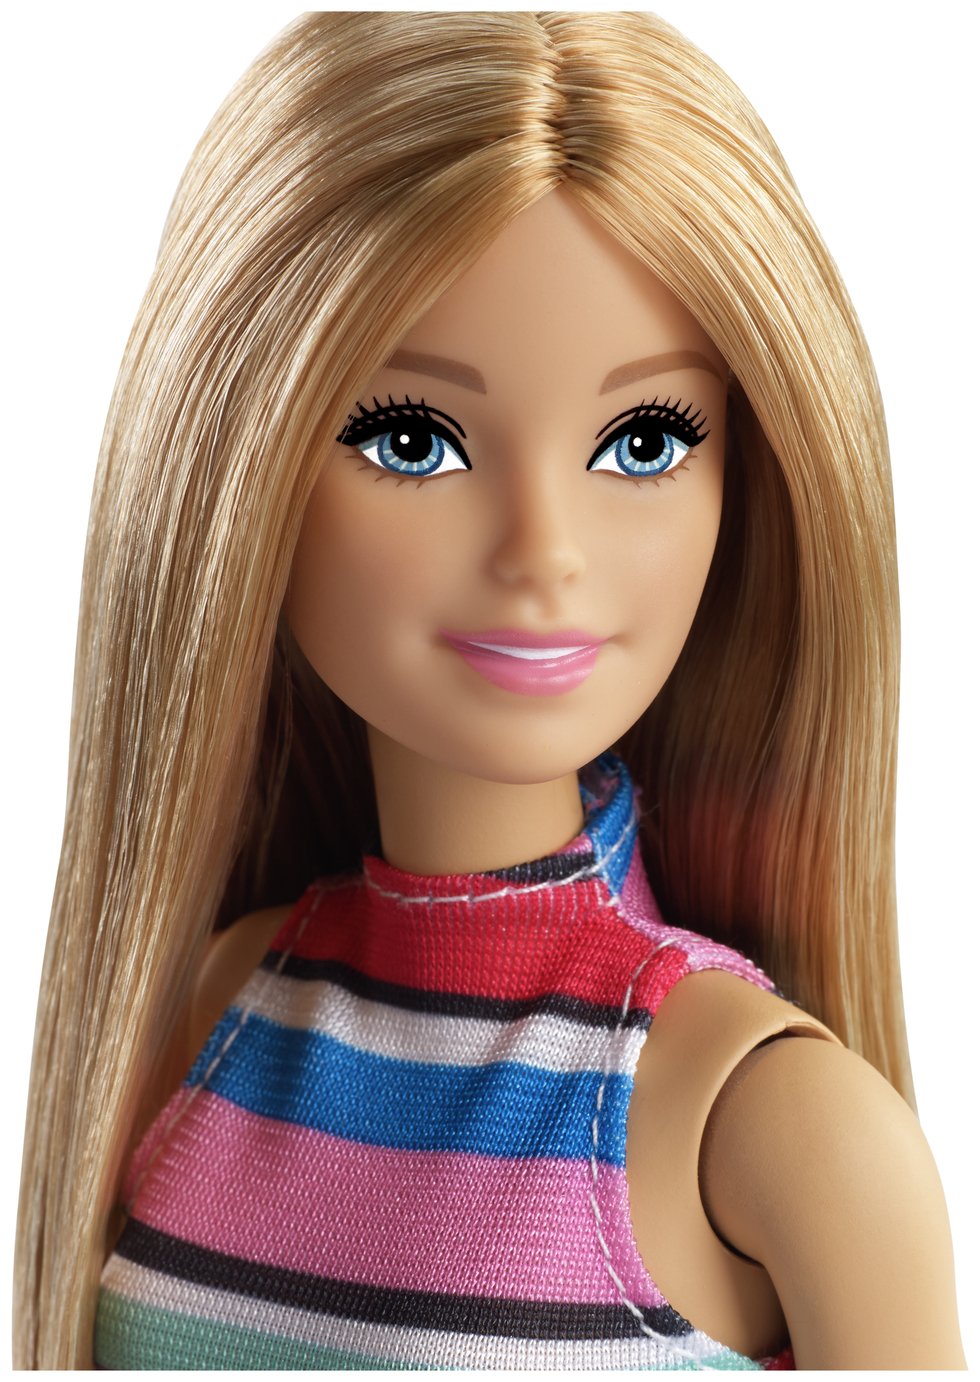 Barbie Doll and Shoes Review